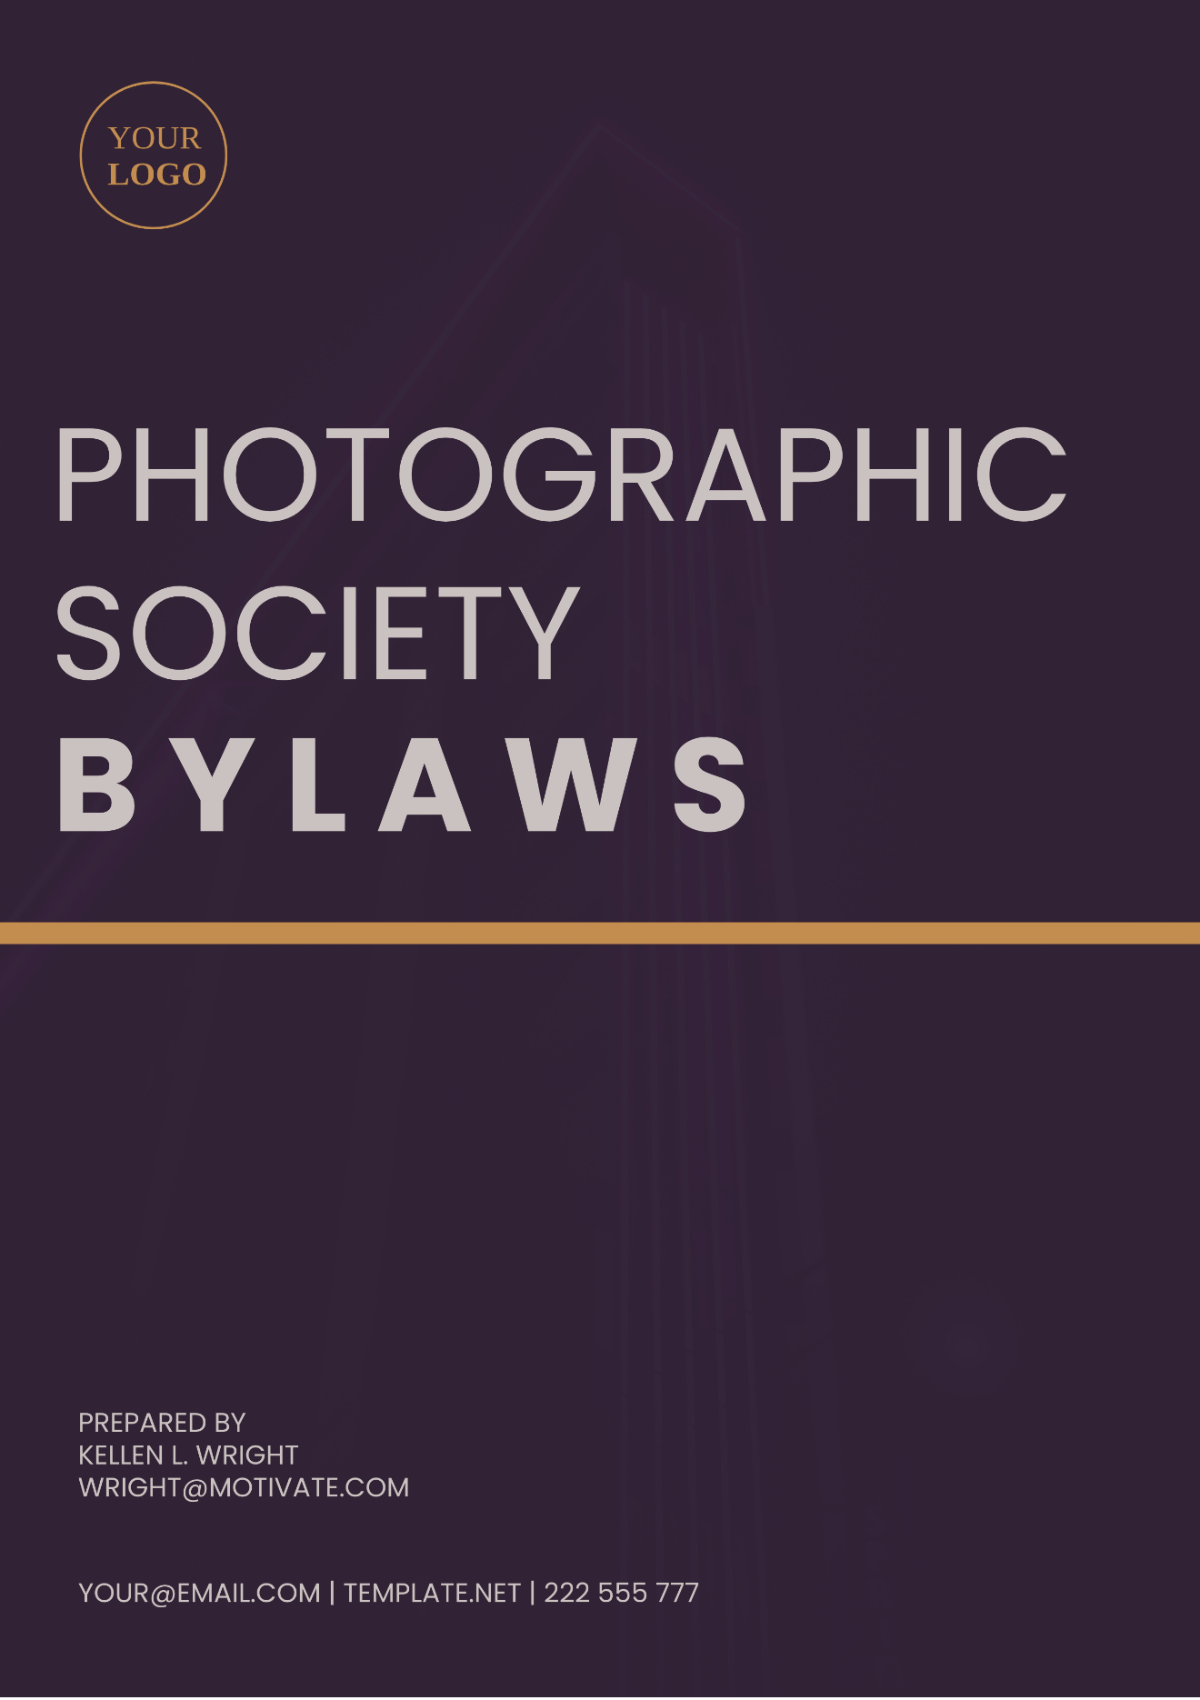 Photographic Society Bylaws Template